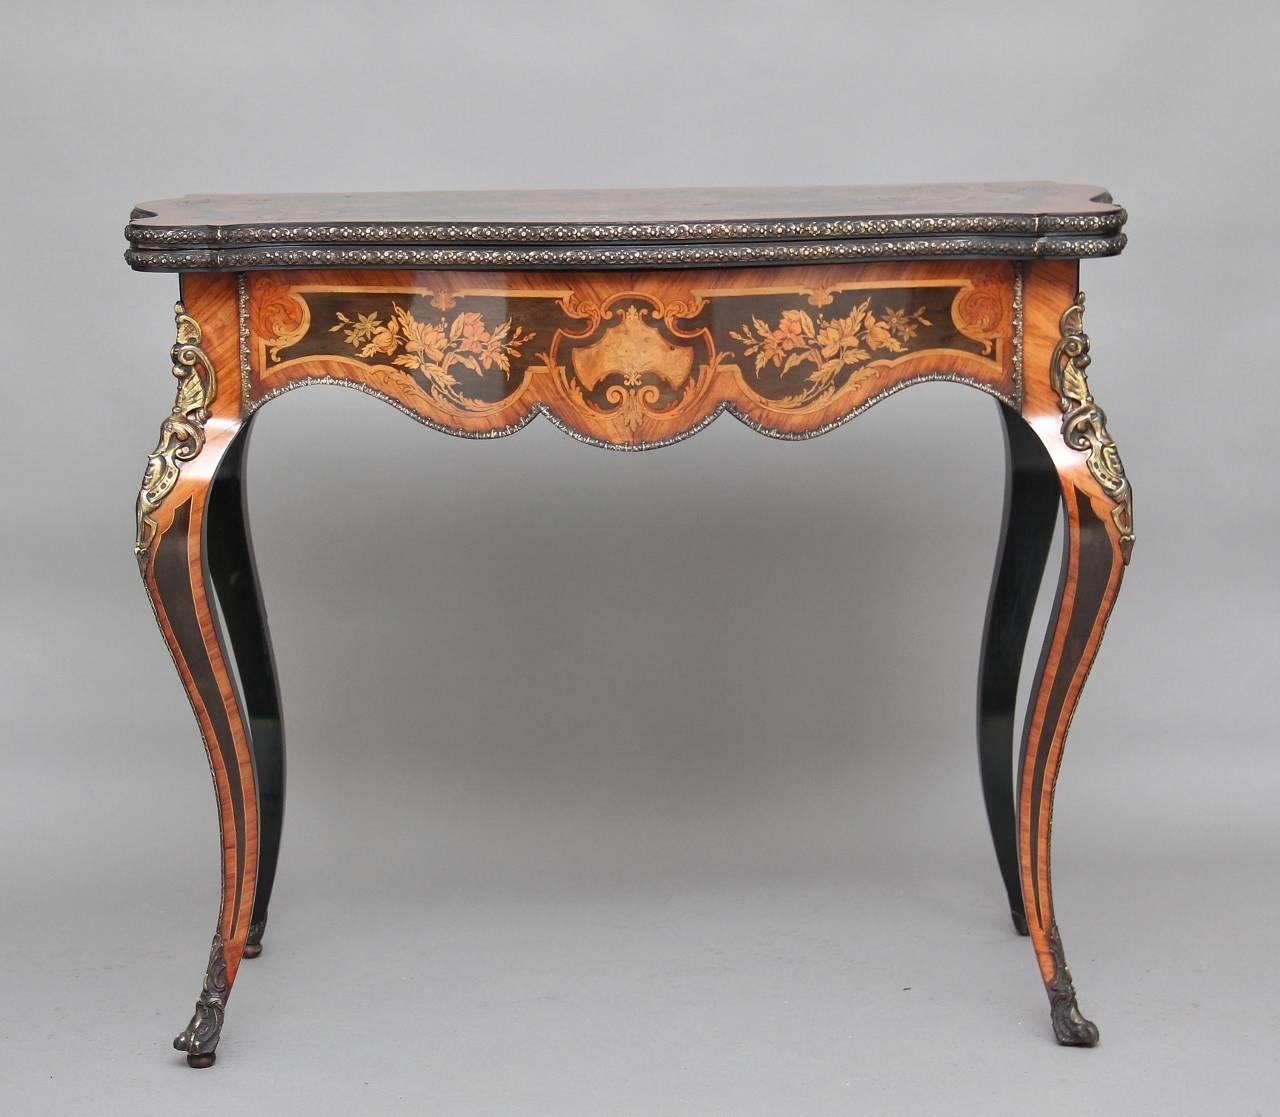 An exhibition quality 19th century free standing French ebonised marquetry and ormolu card table crossbanded in kingwood, the shaped top with ormolu decoration on the edge, profusely inlaid with floral marquetry on the top, the centre of the top